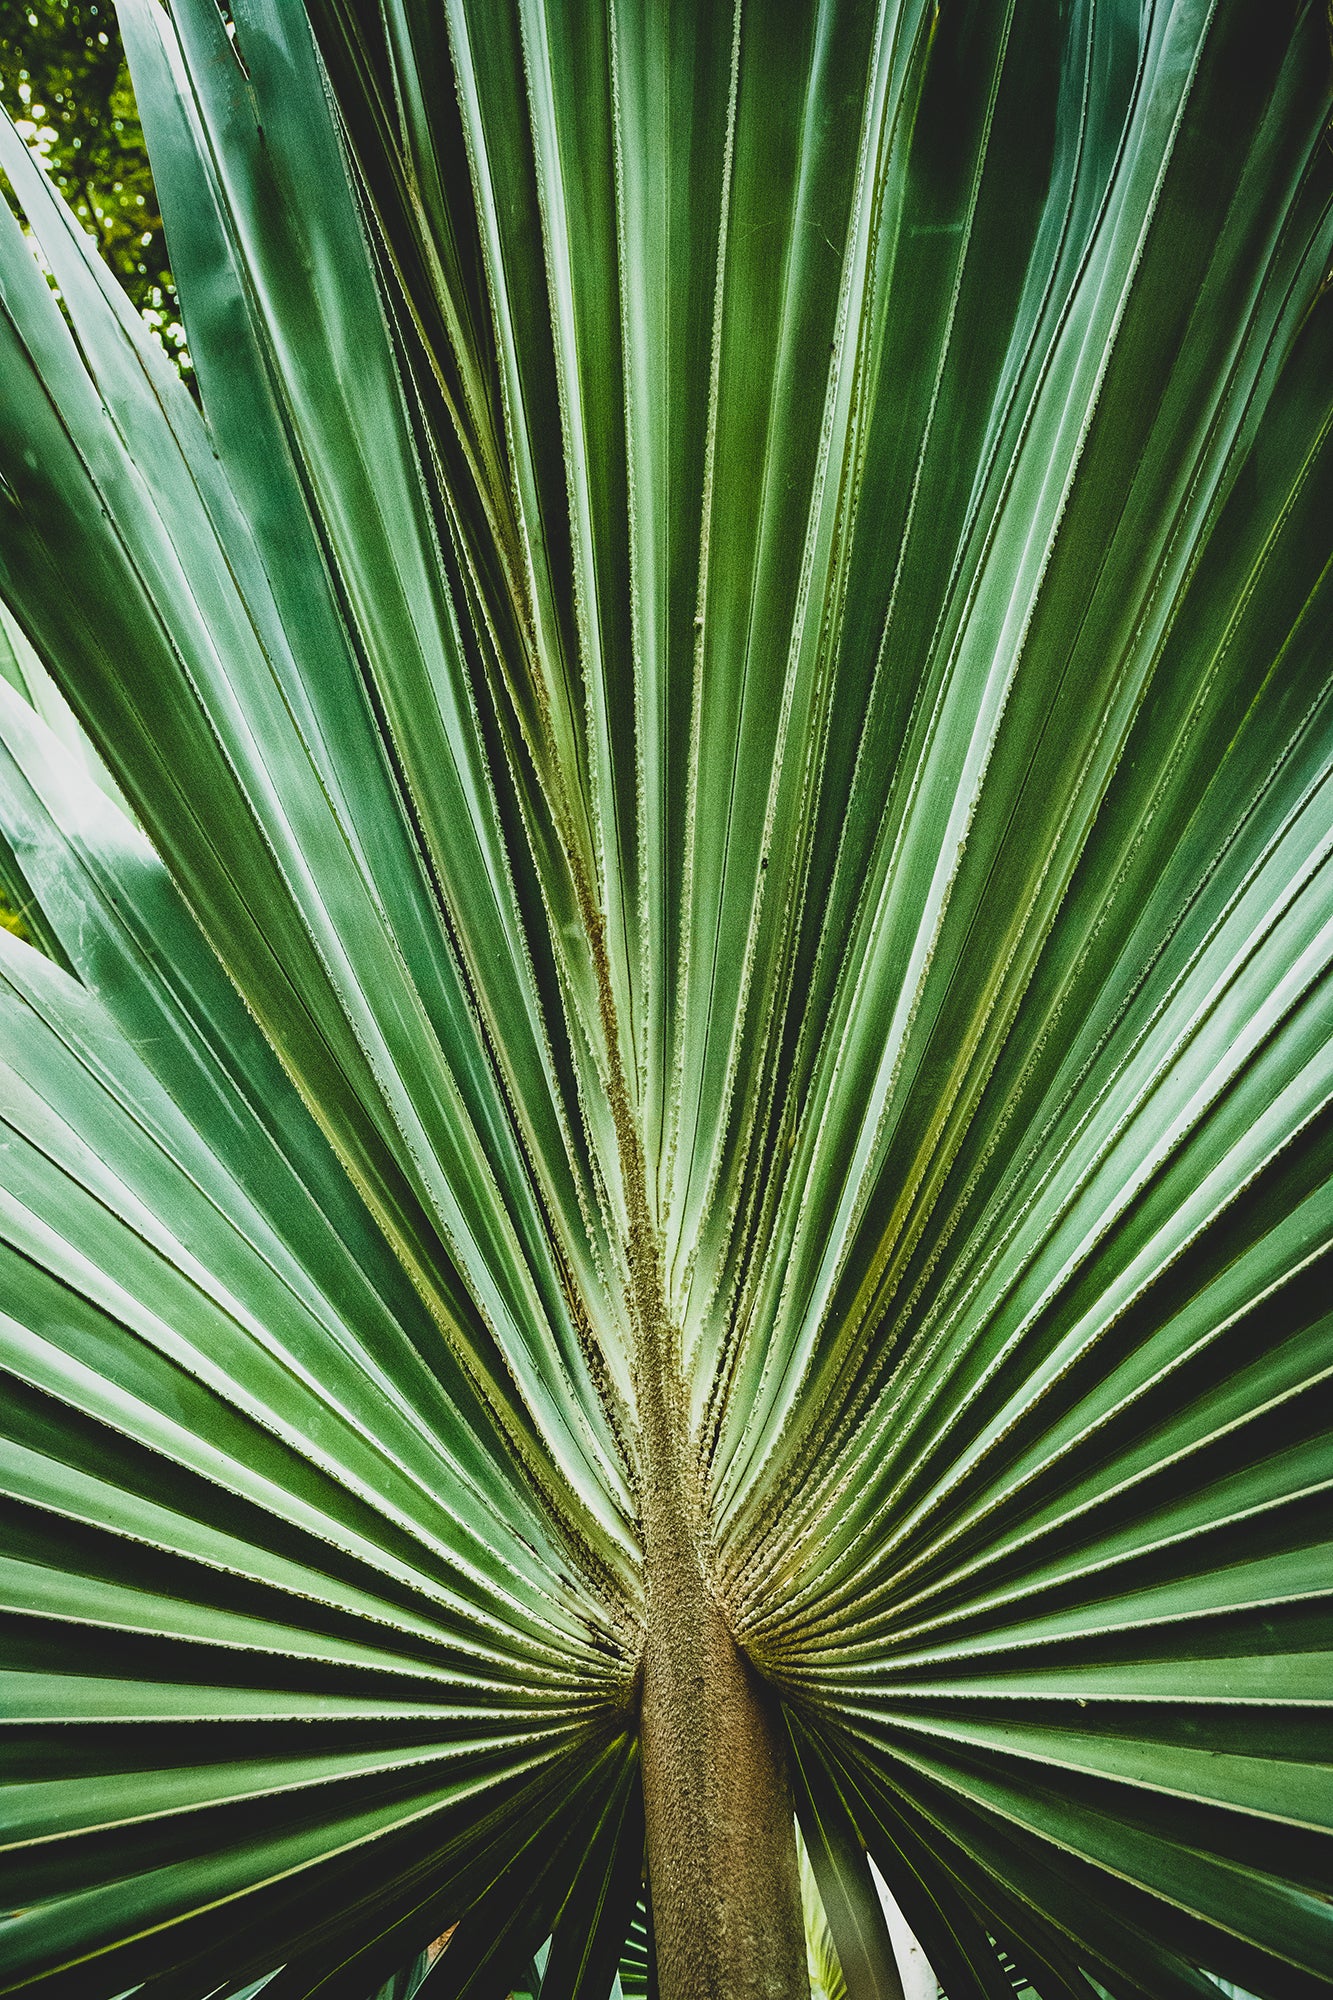 Pictures For My Office Wall: Aged and Colorized Wide Palm Leaves 2 - Botanical / Plants / Nature Photograph Loose / Unframed Wall Art Print - Artwork